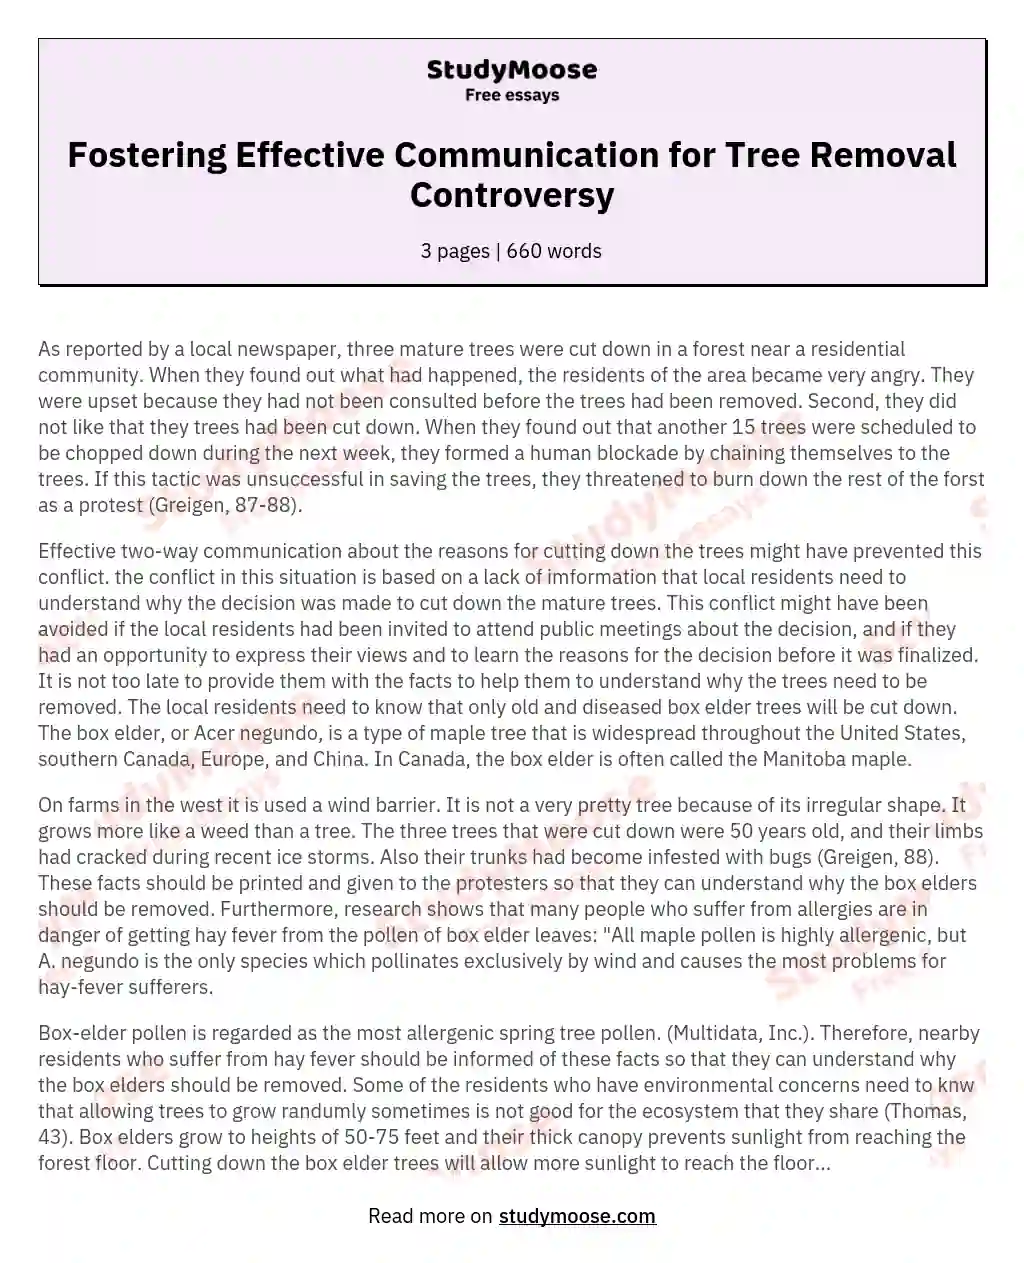 Fostering Effective Communication for Tree Removal Controversy essay